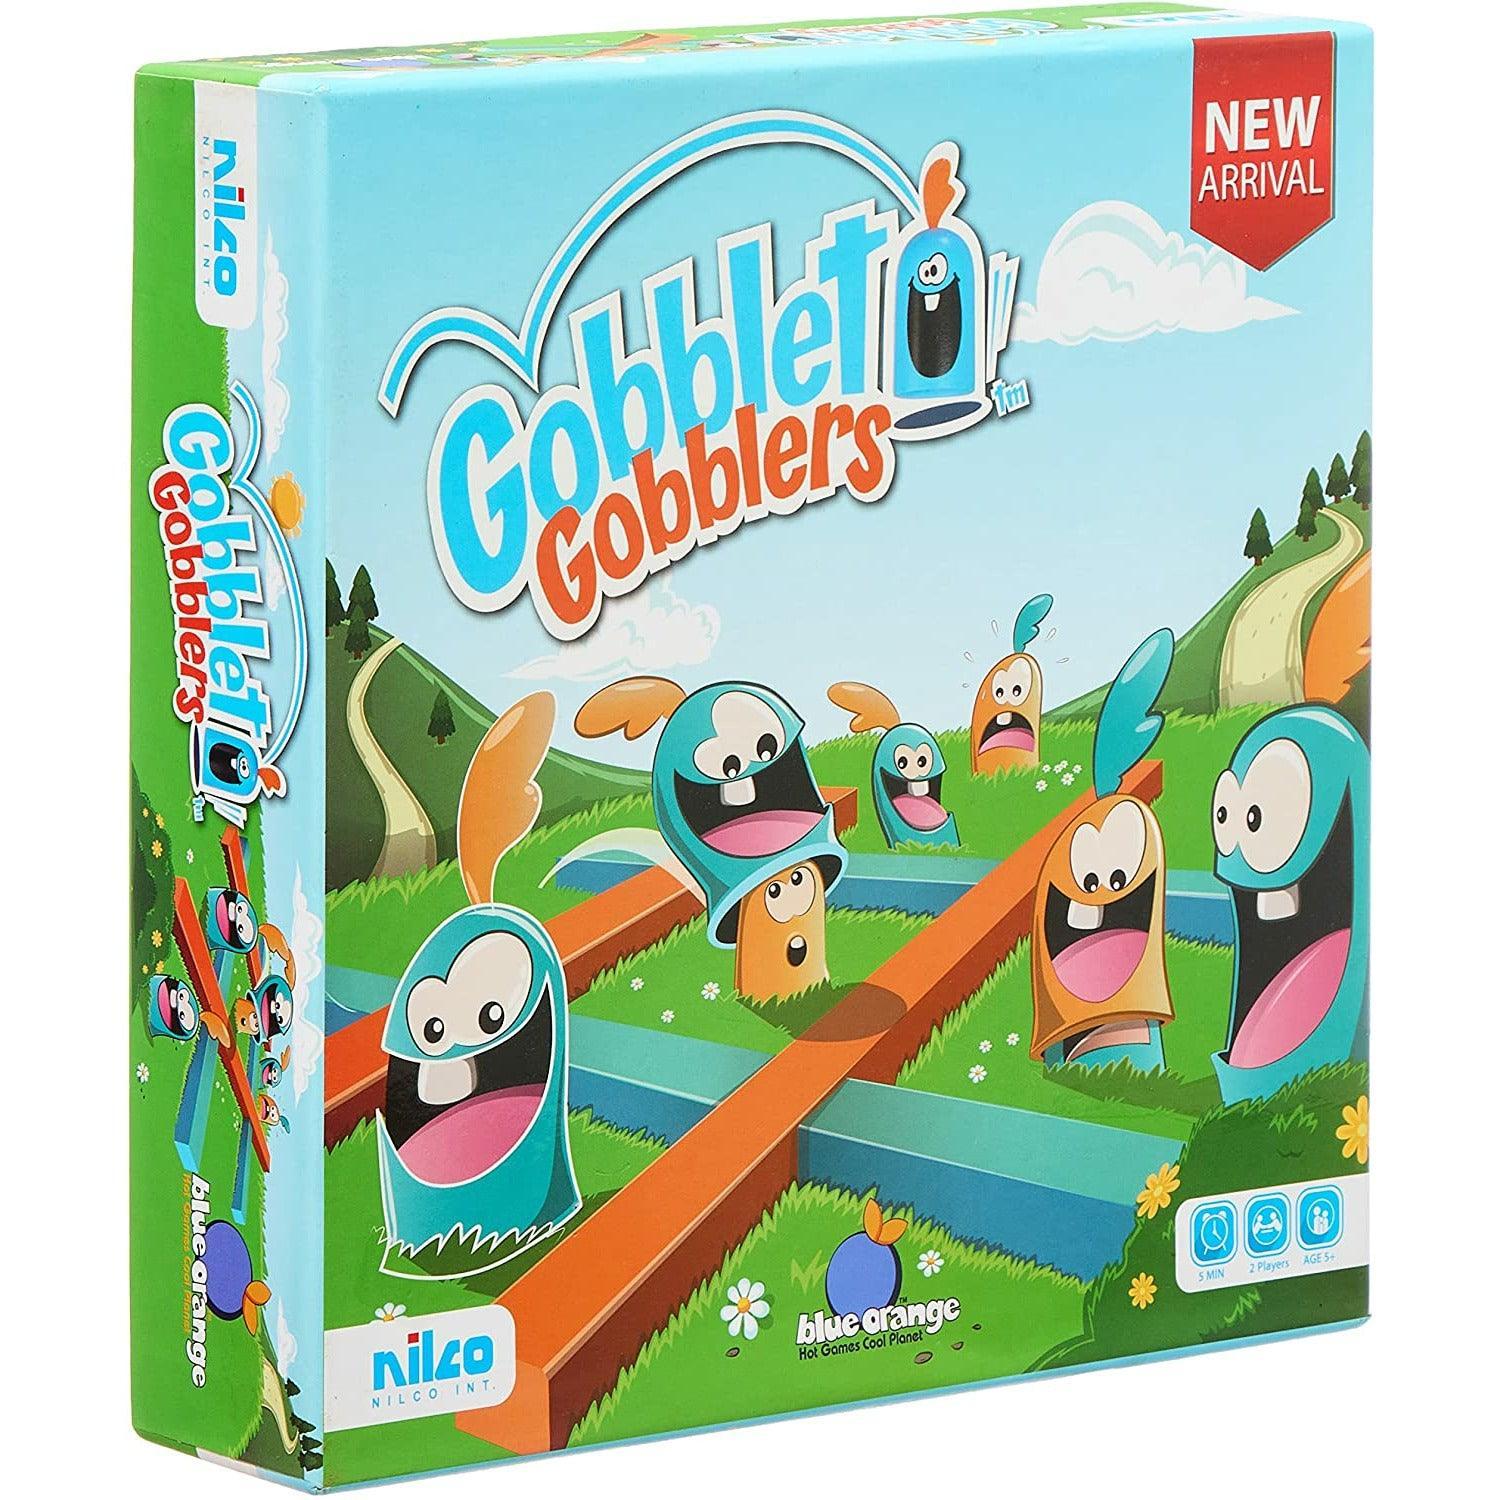 Nilco Gobblet Gobblers Toy - Ourkids - Nilco